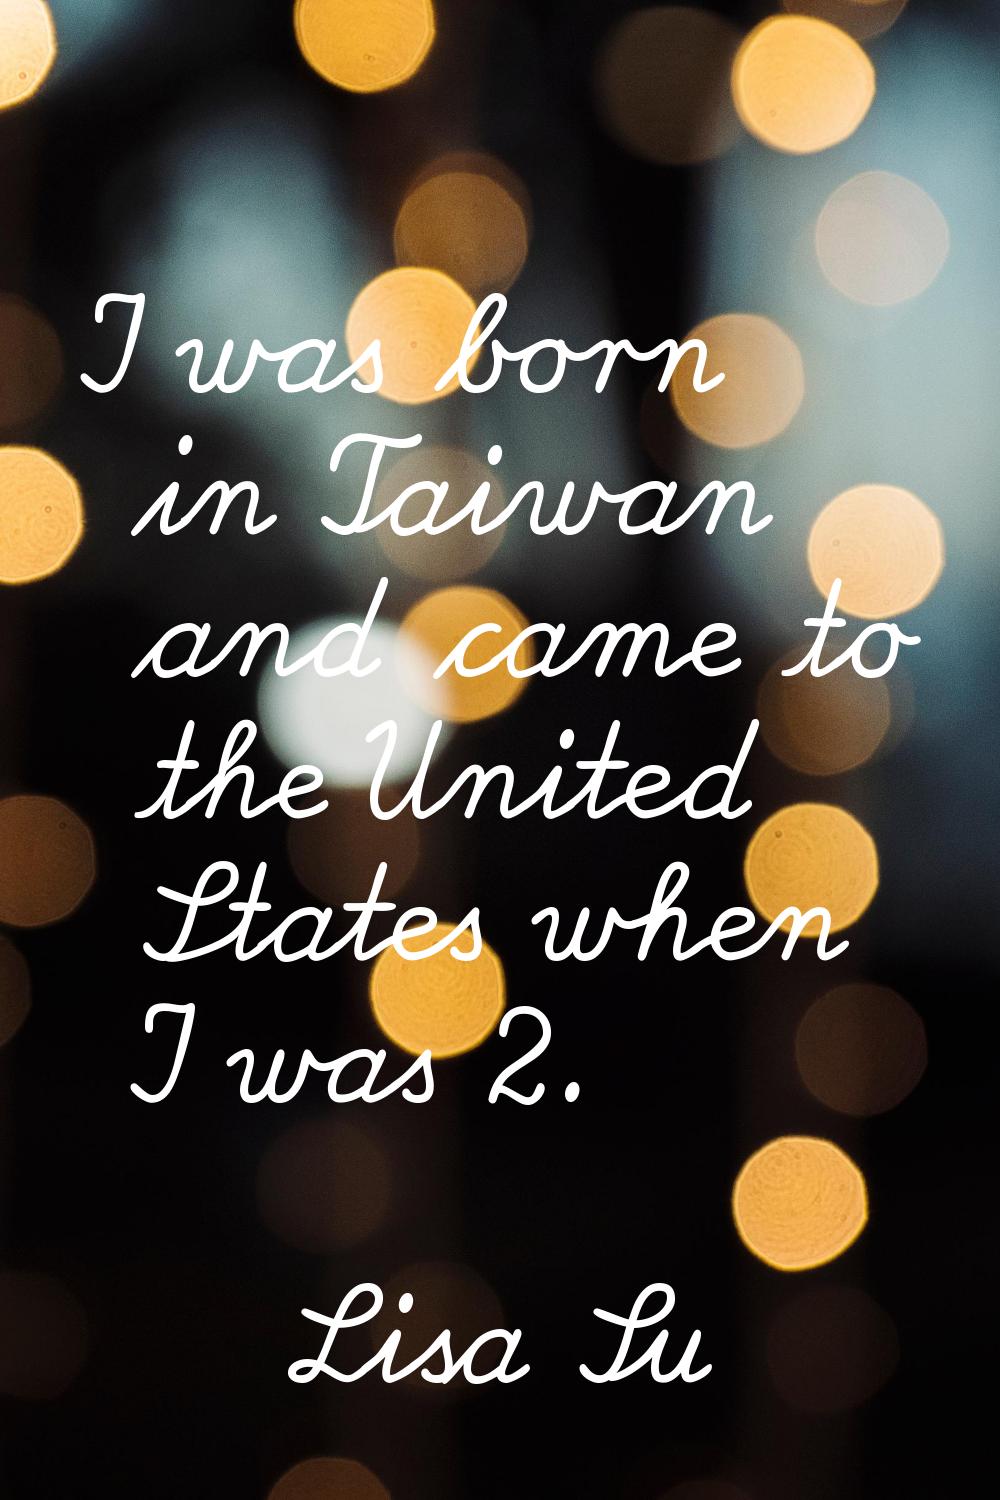 I was born in Taiwan and came to the United States when I was 2.